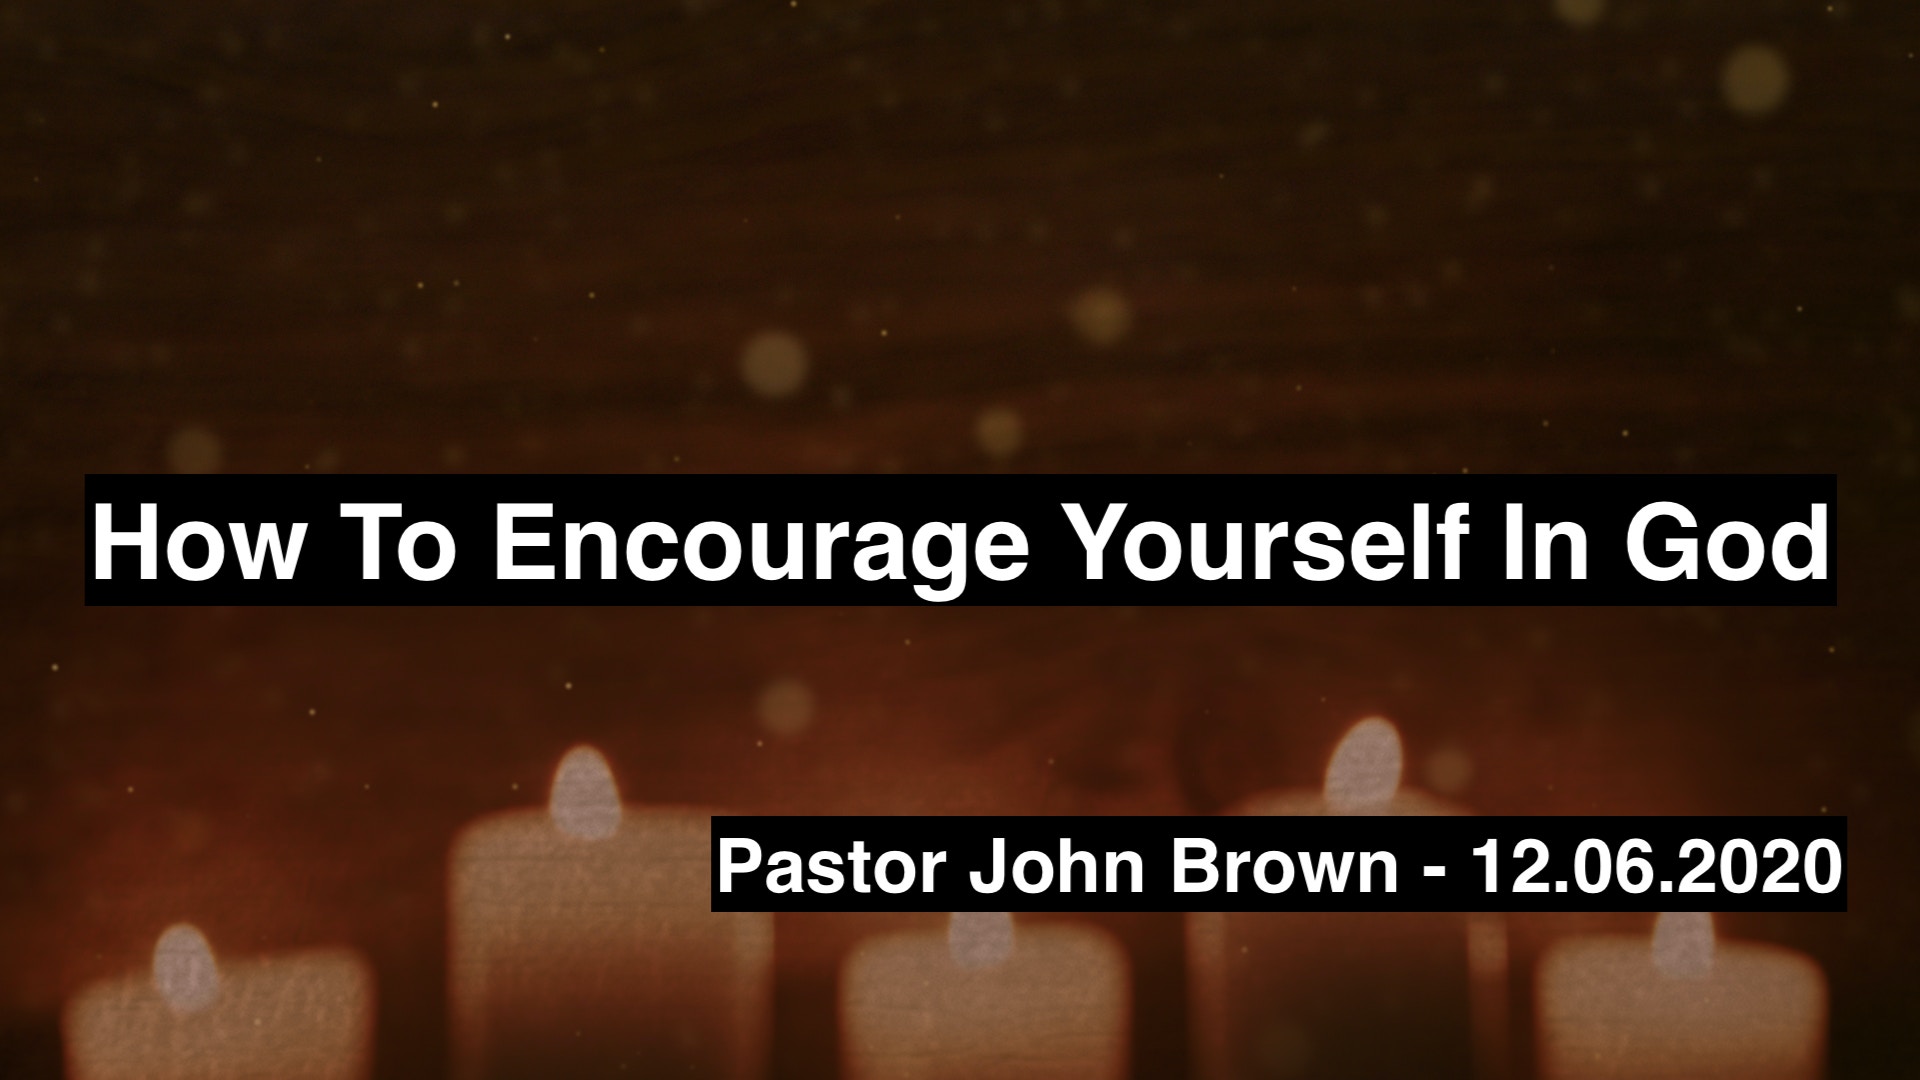 How To Encourage Yourself In God